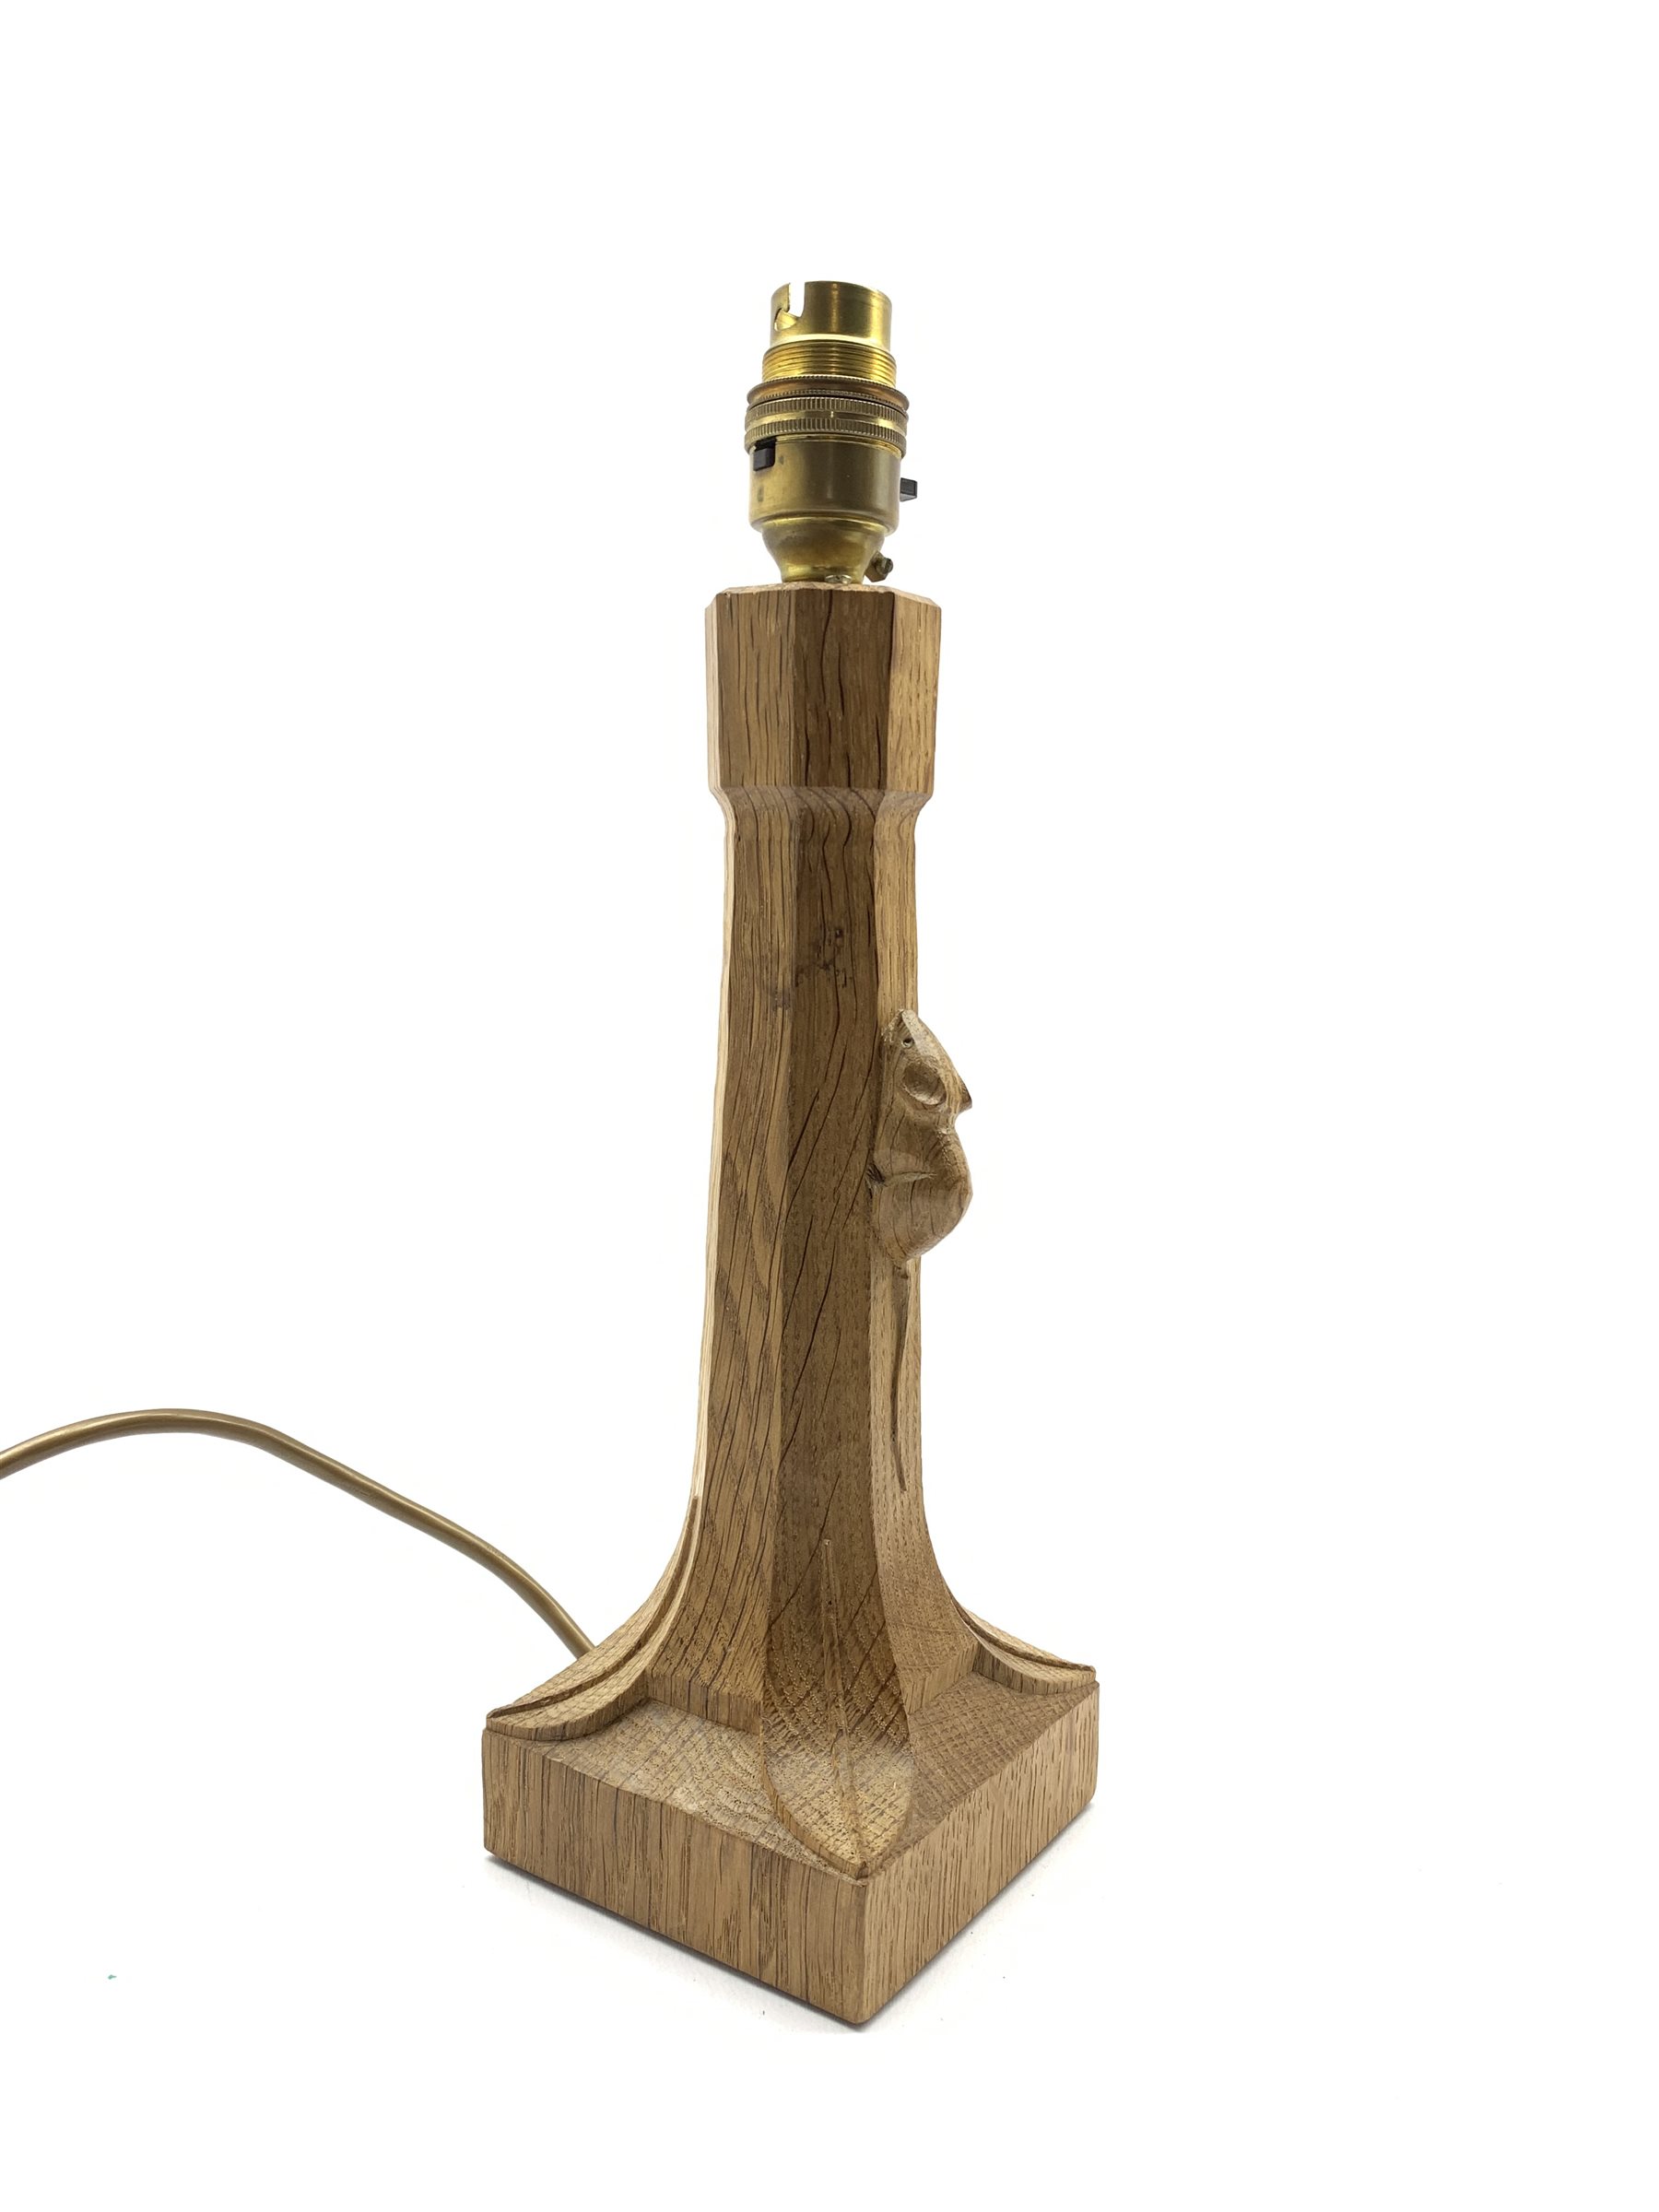 Thompson of Kilburn 'Mouseman' adzed oak table lamp with octagonal stem on a leaf carved square base - Image 2 of 5